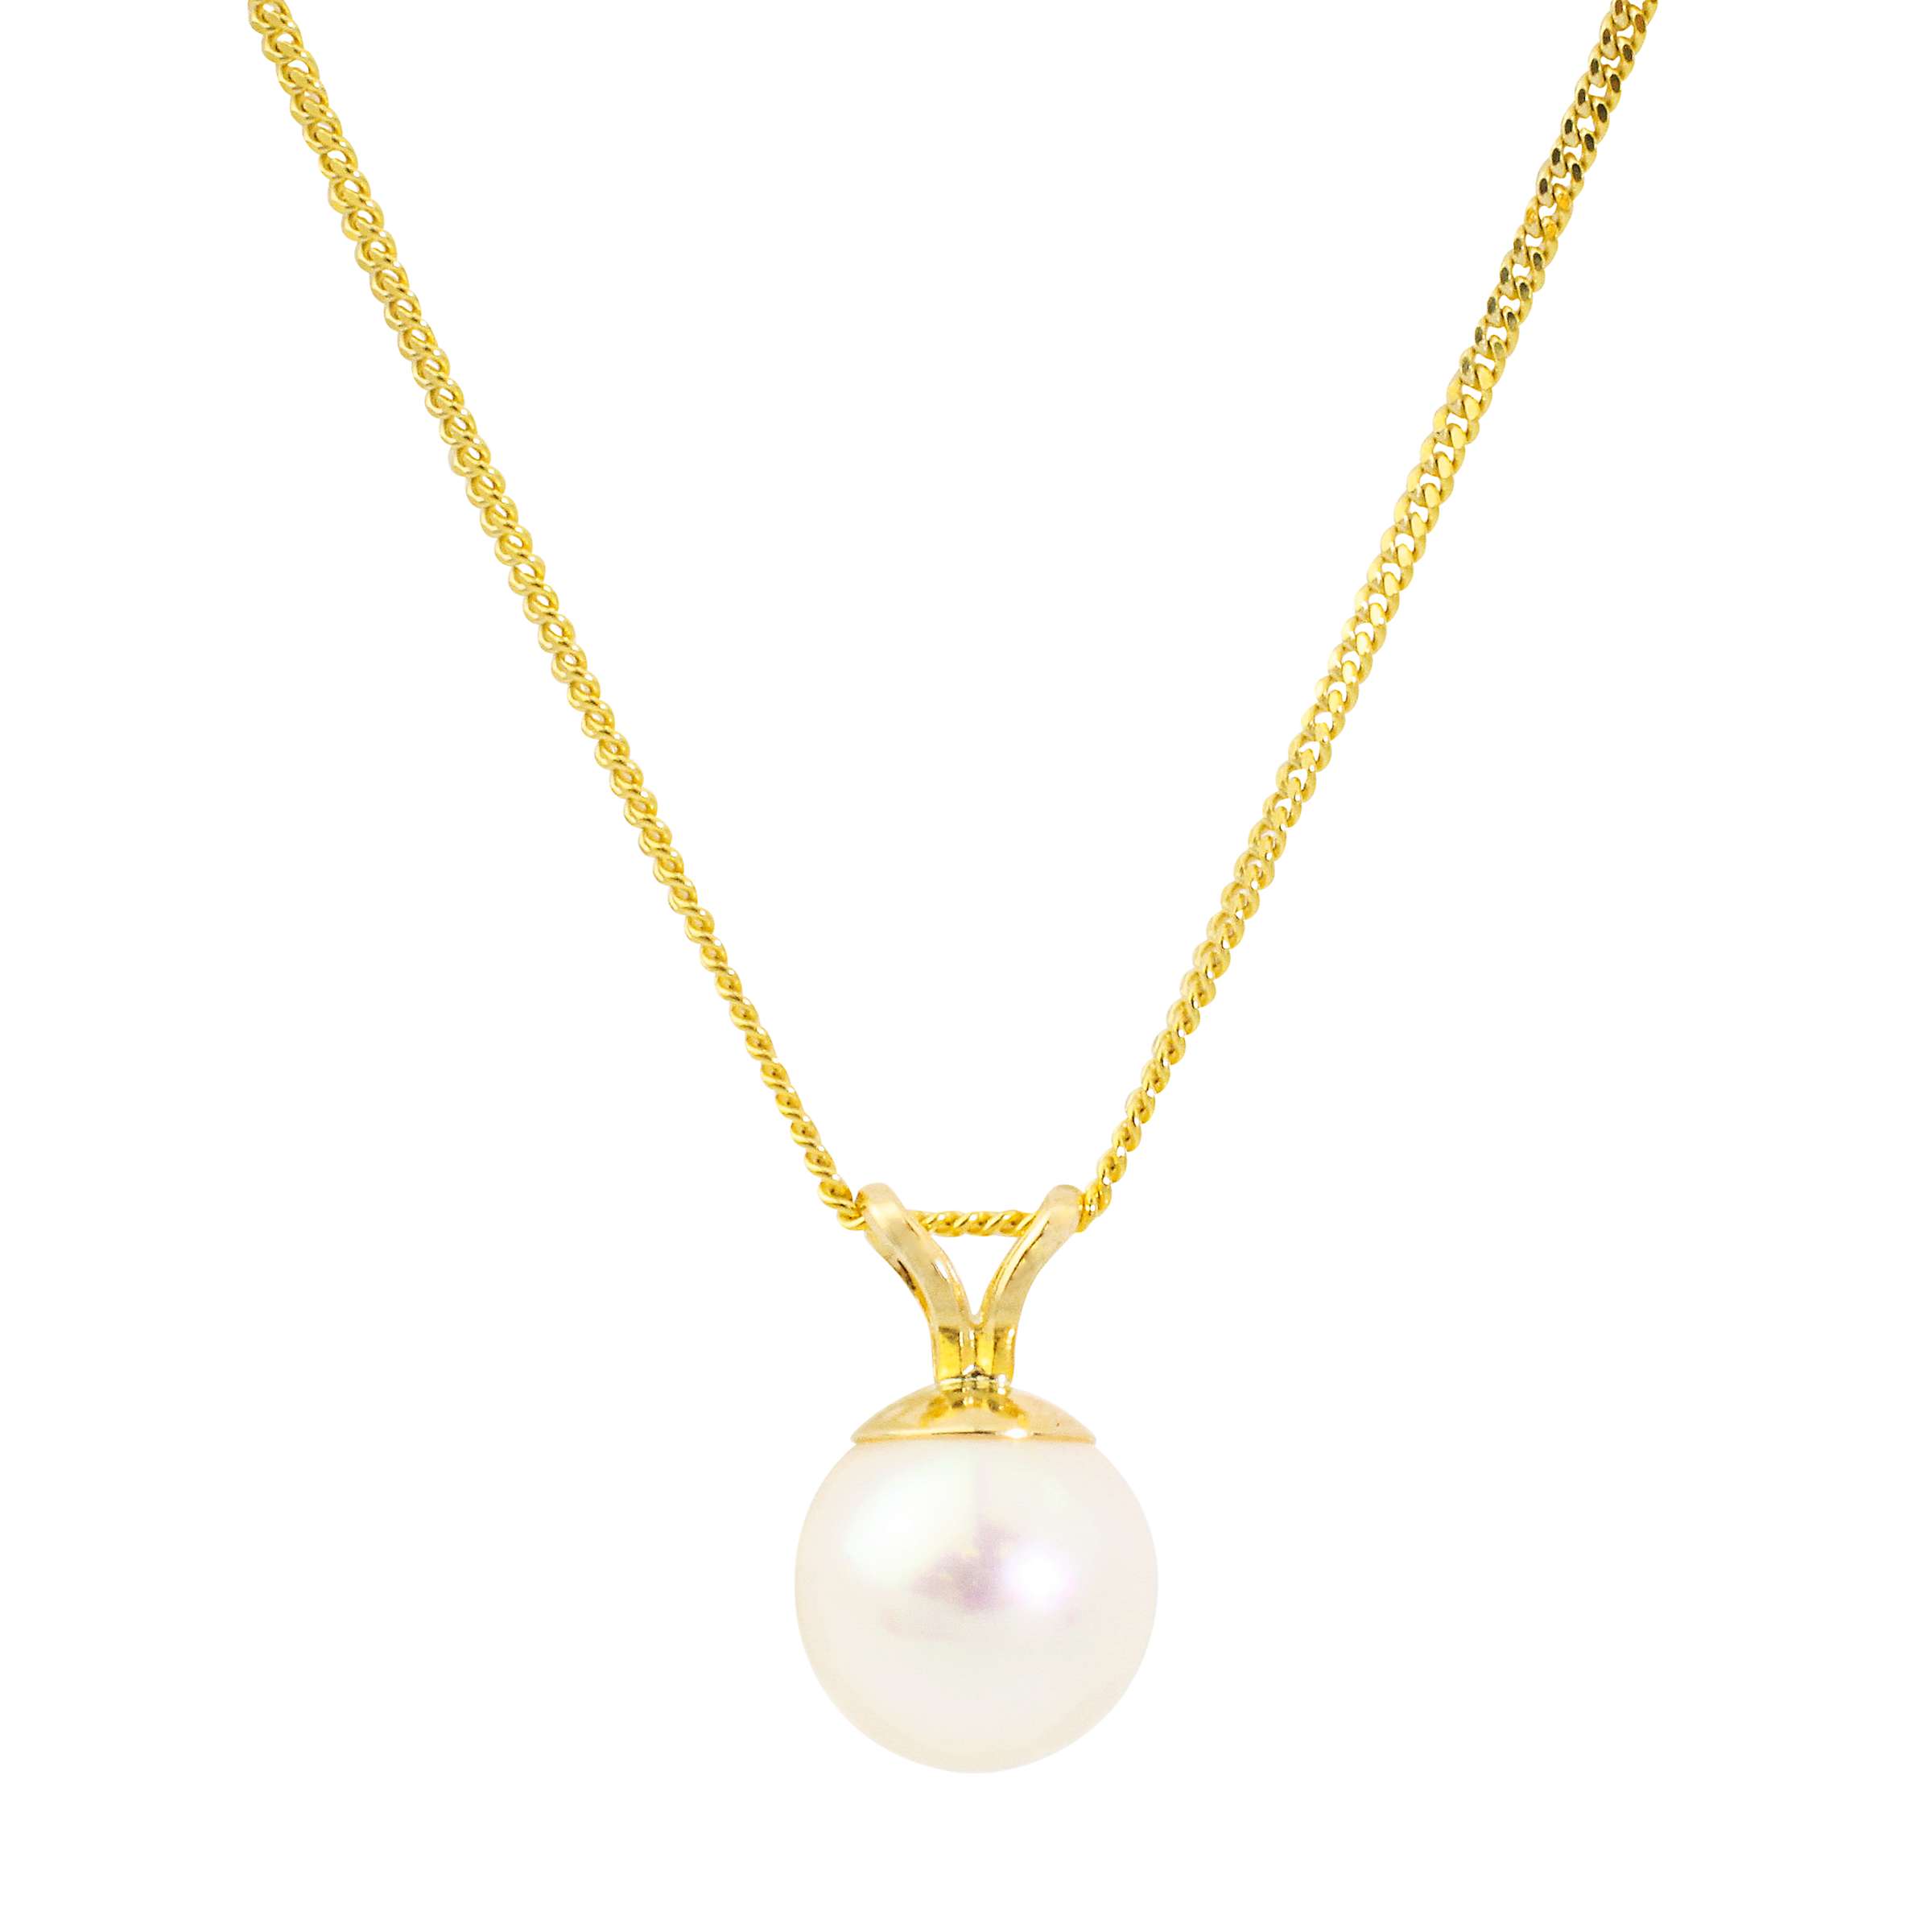 Buy A B Davis 7mm White Akoya Cultured Pearl Pendant Necklace in 9ct Yellow Gold Online at johnlewis.com